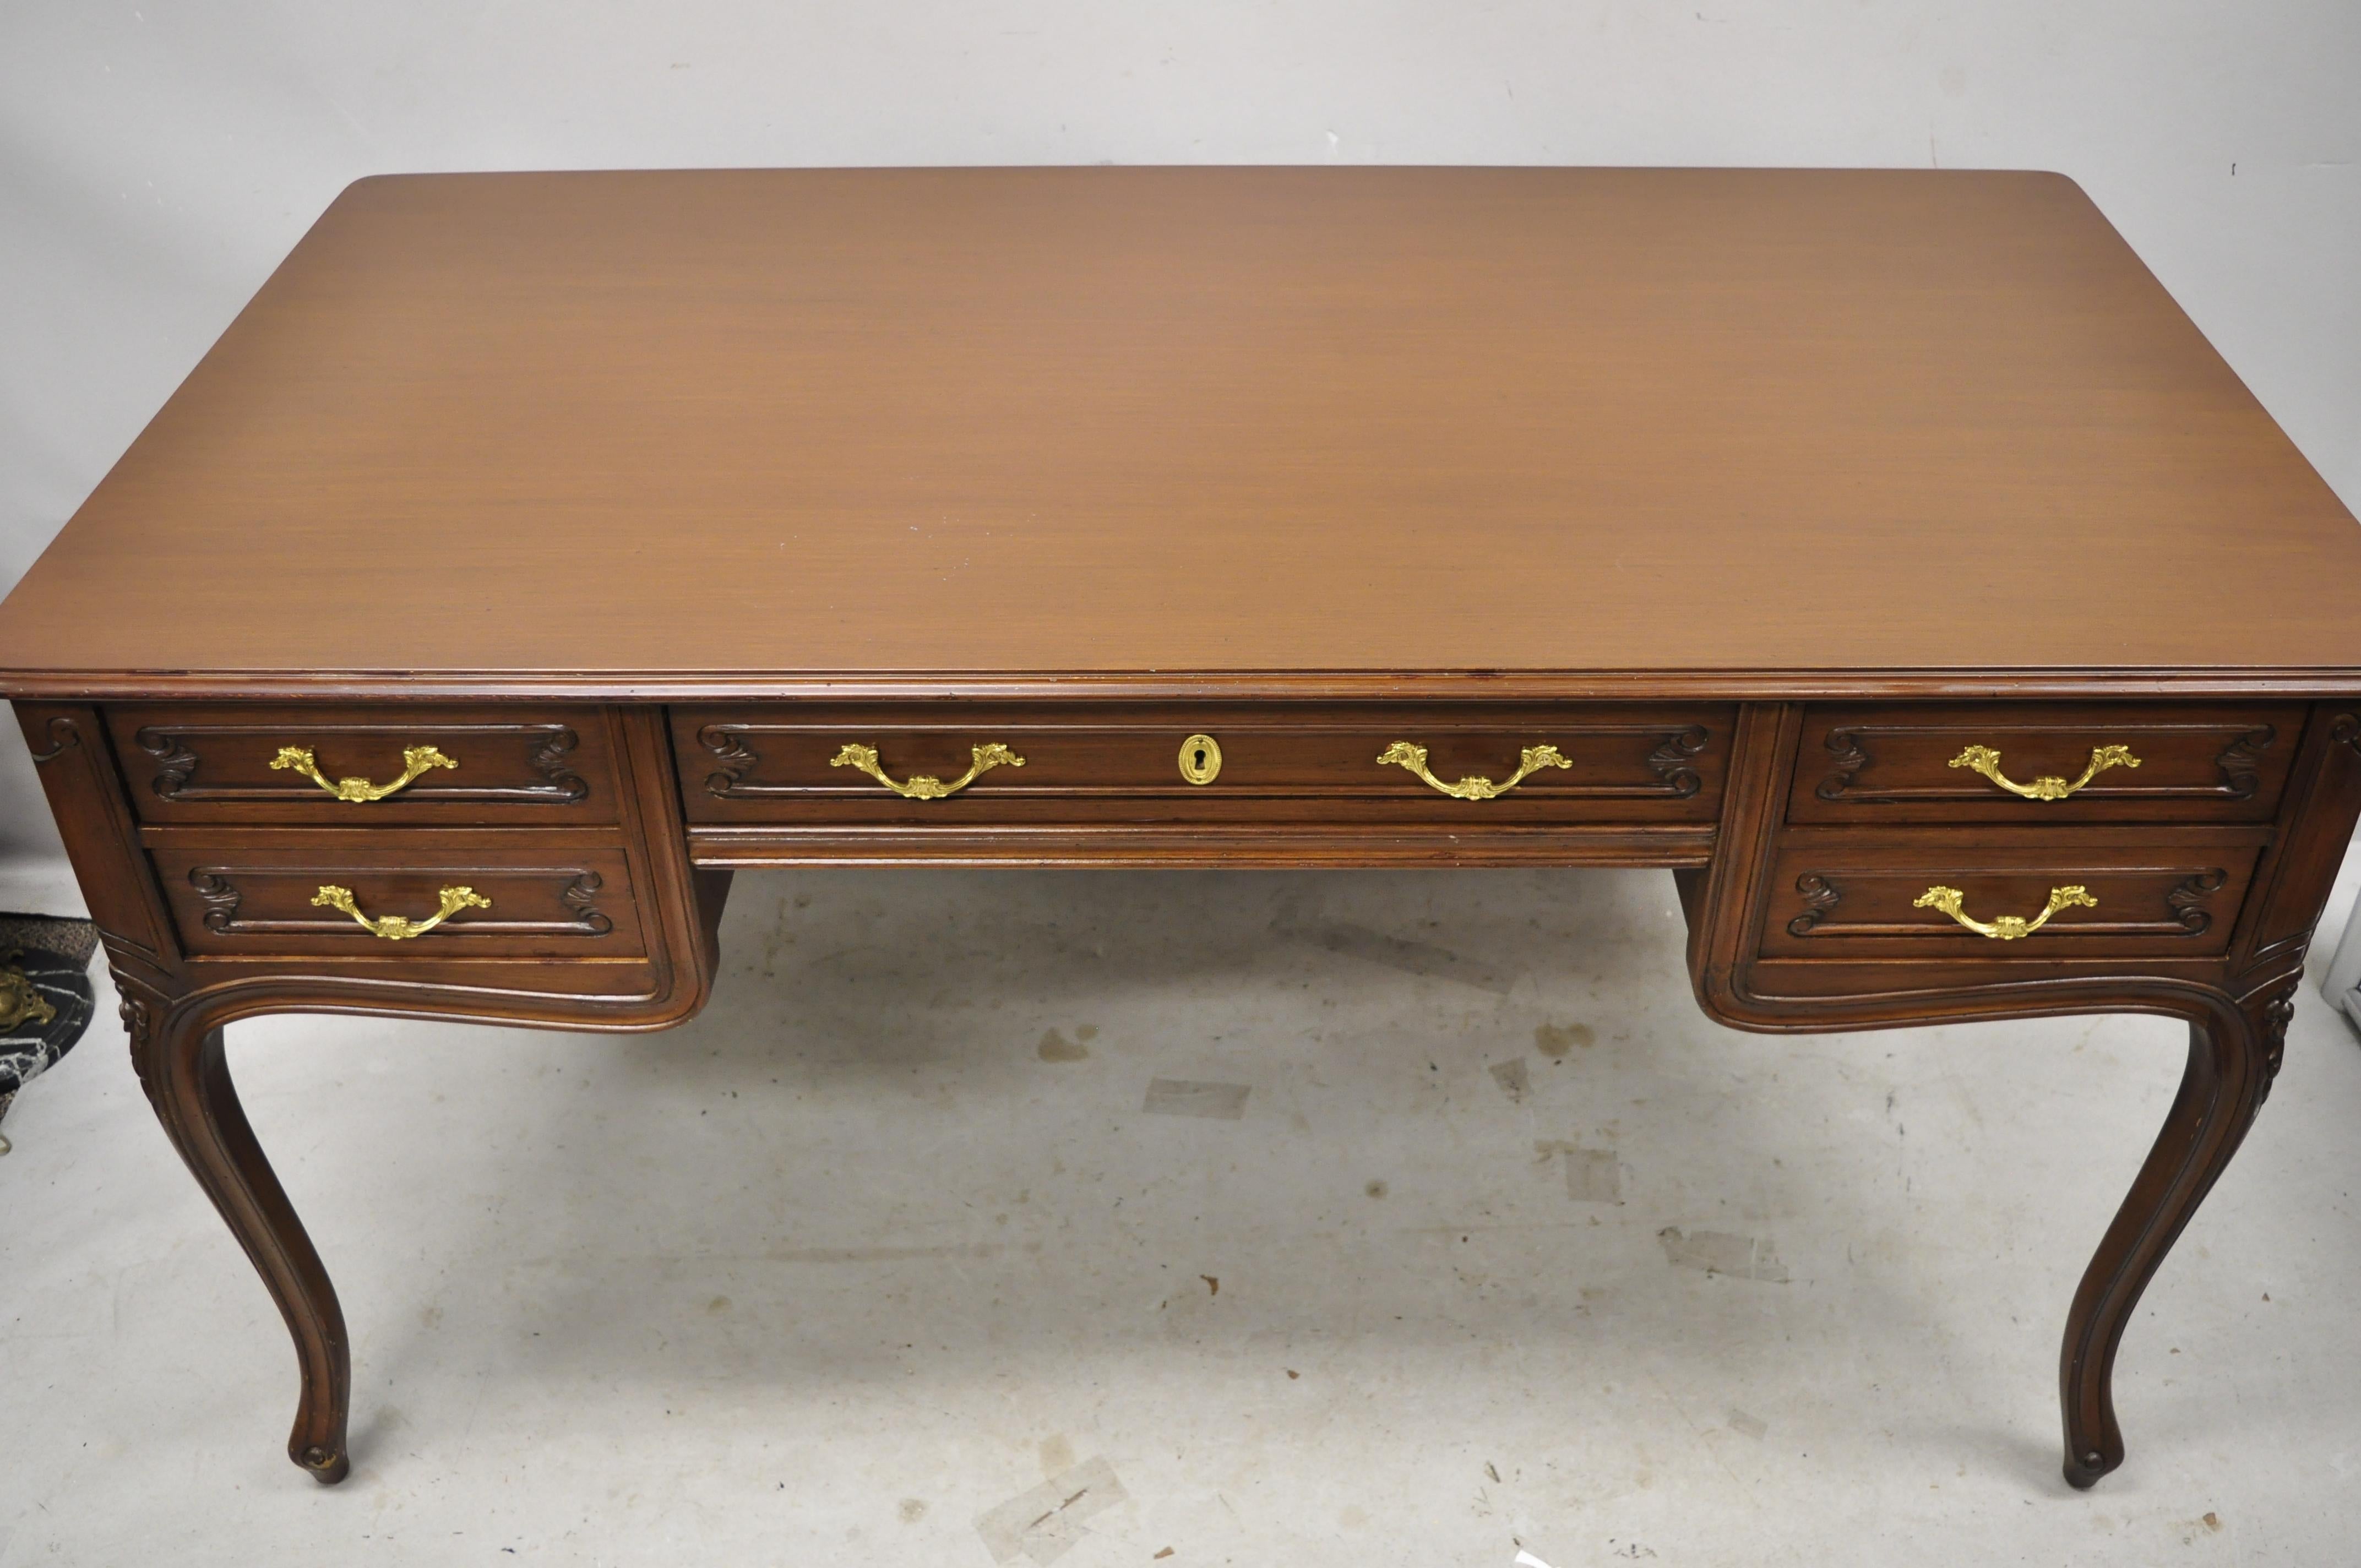 Vintage French Country Provincial Louis XV style executive office writing desk with glass top. Item features a custom glass top, solid wood construction, distressed finish, nicely carved details, finished back, 5 dovetailed drawers, cabriole legs,